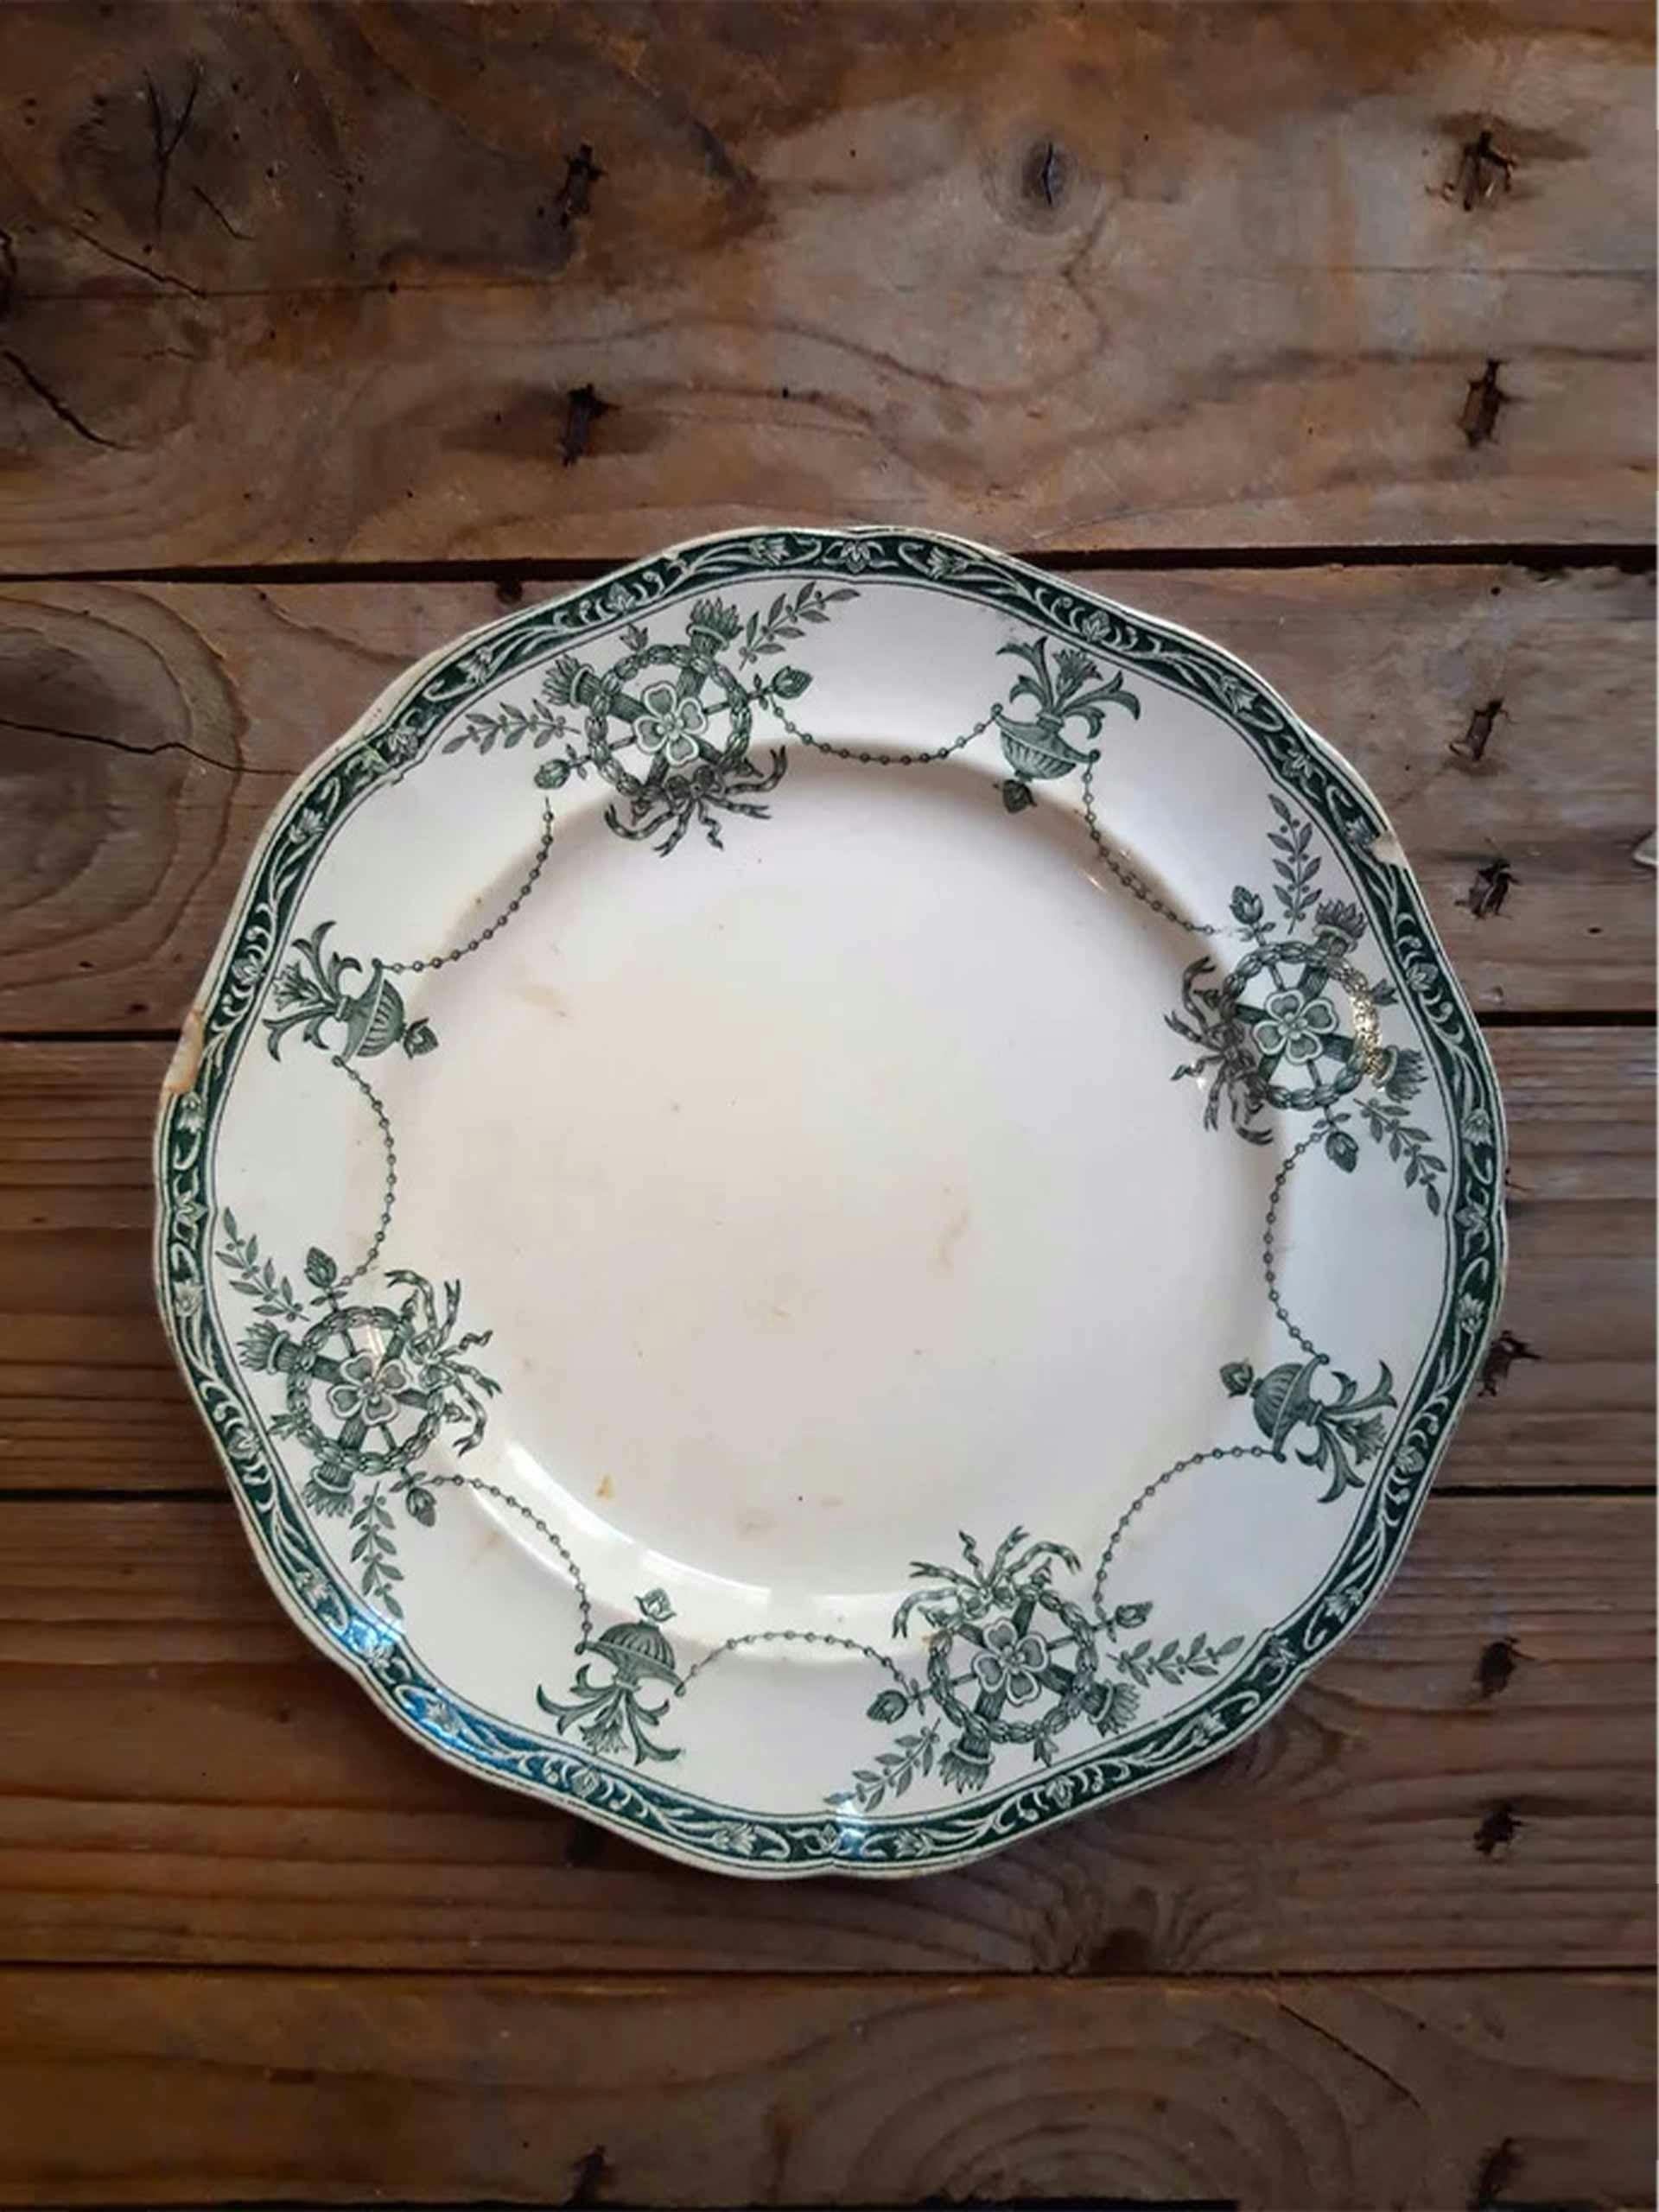 Patterned plate